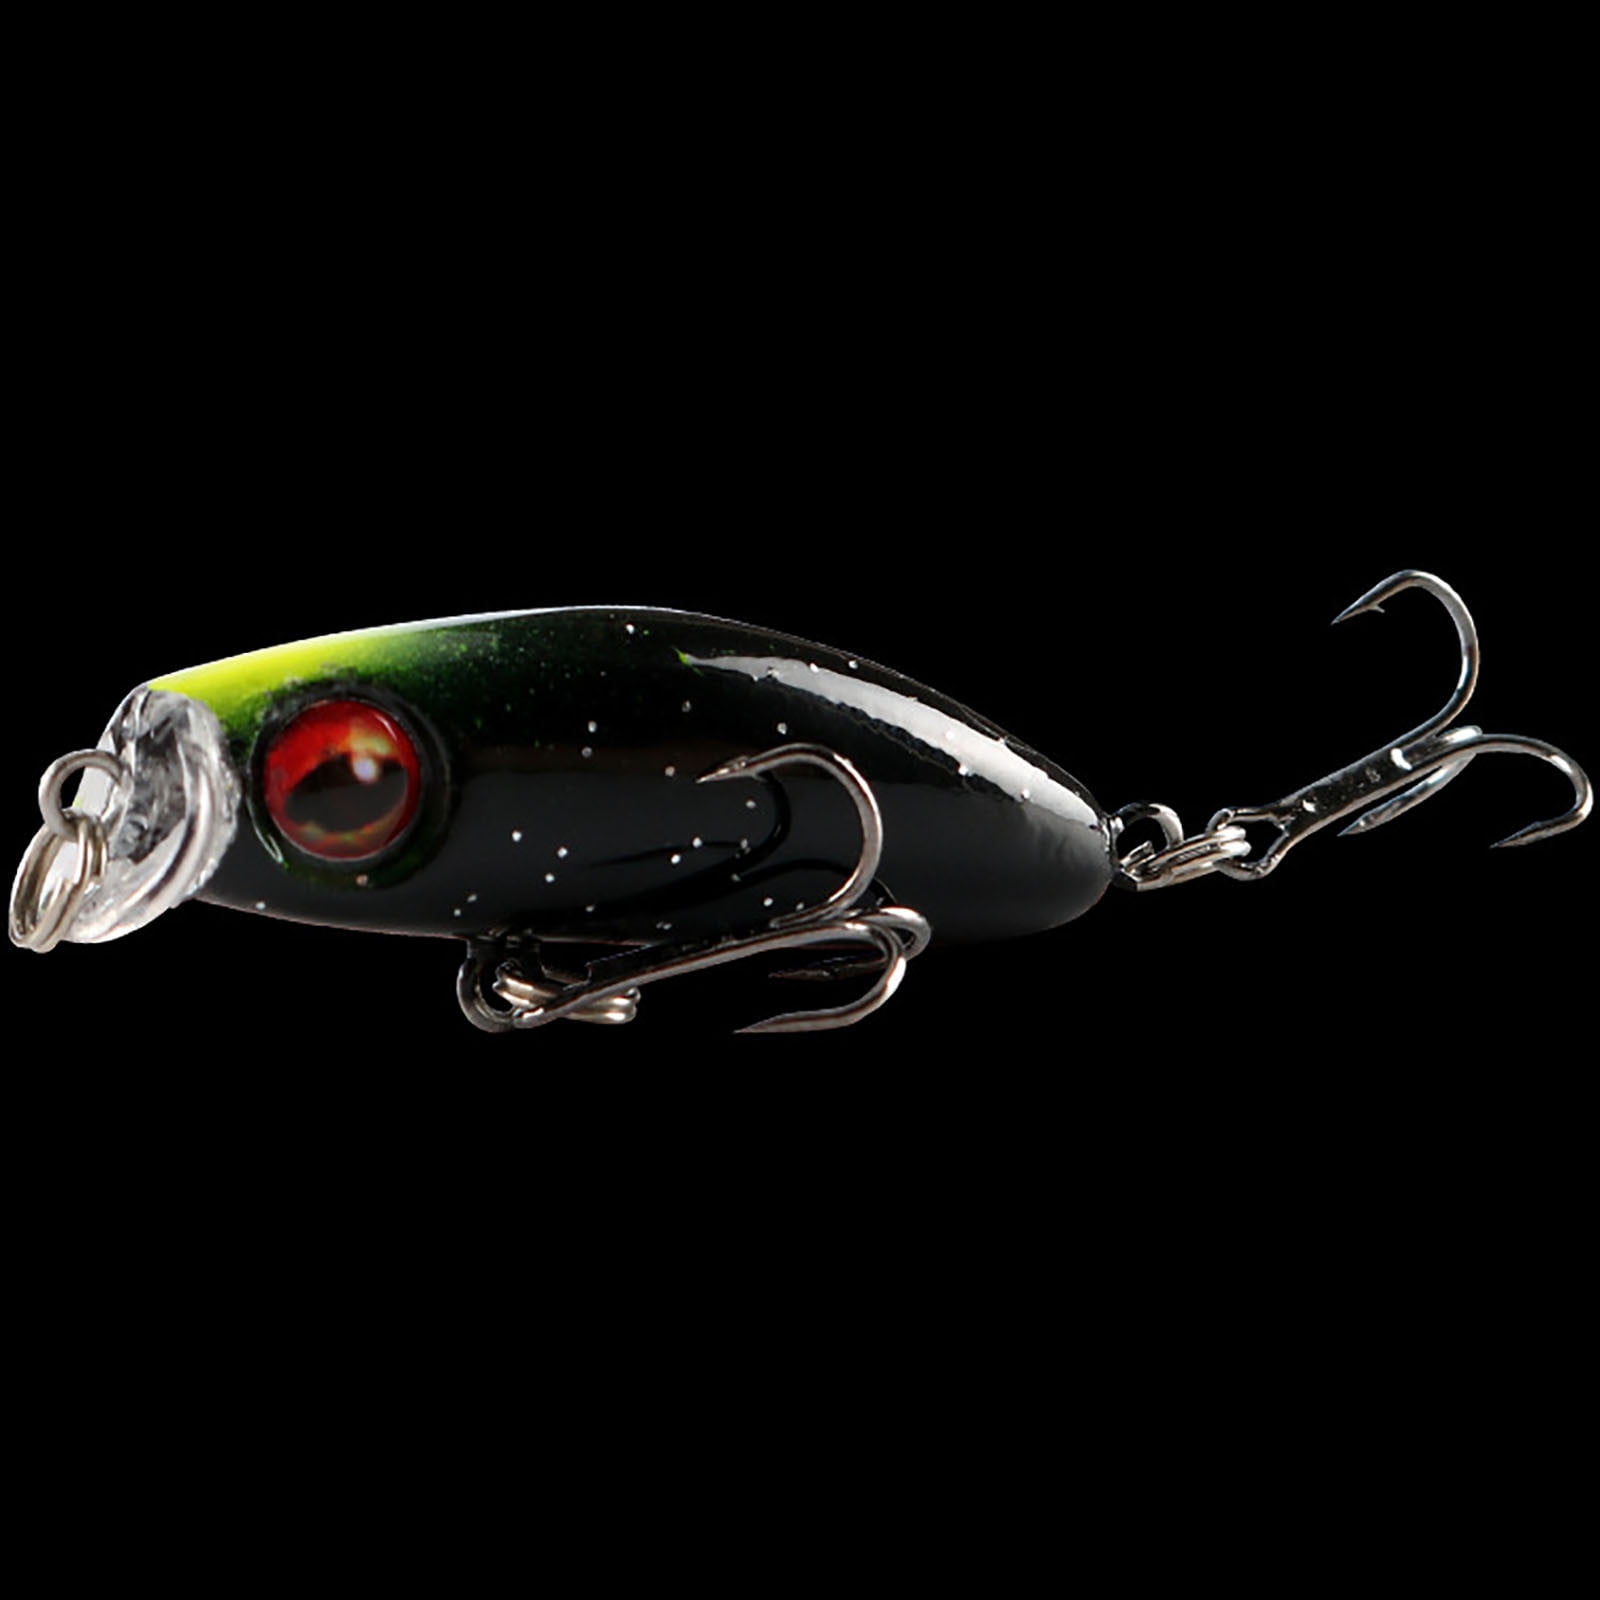 SDJMa 1.9 Fishing Lures Crankbaits, Pre-Rigged Swimbaits with Ultra-Sharp  Hooks, Fishing Hard Baits Swimbaits Boat Topwater Lures for Trout Bass